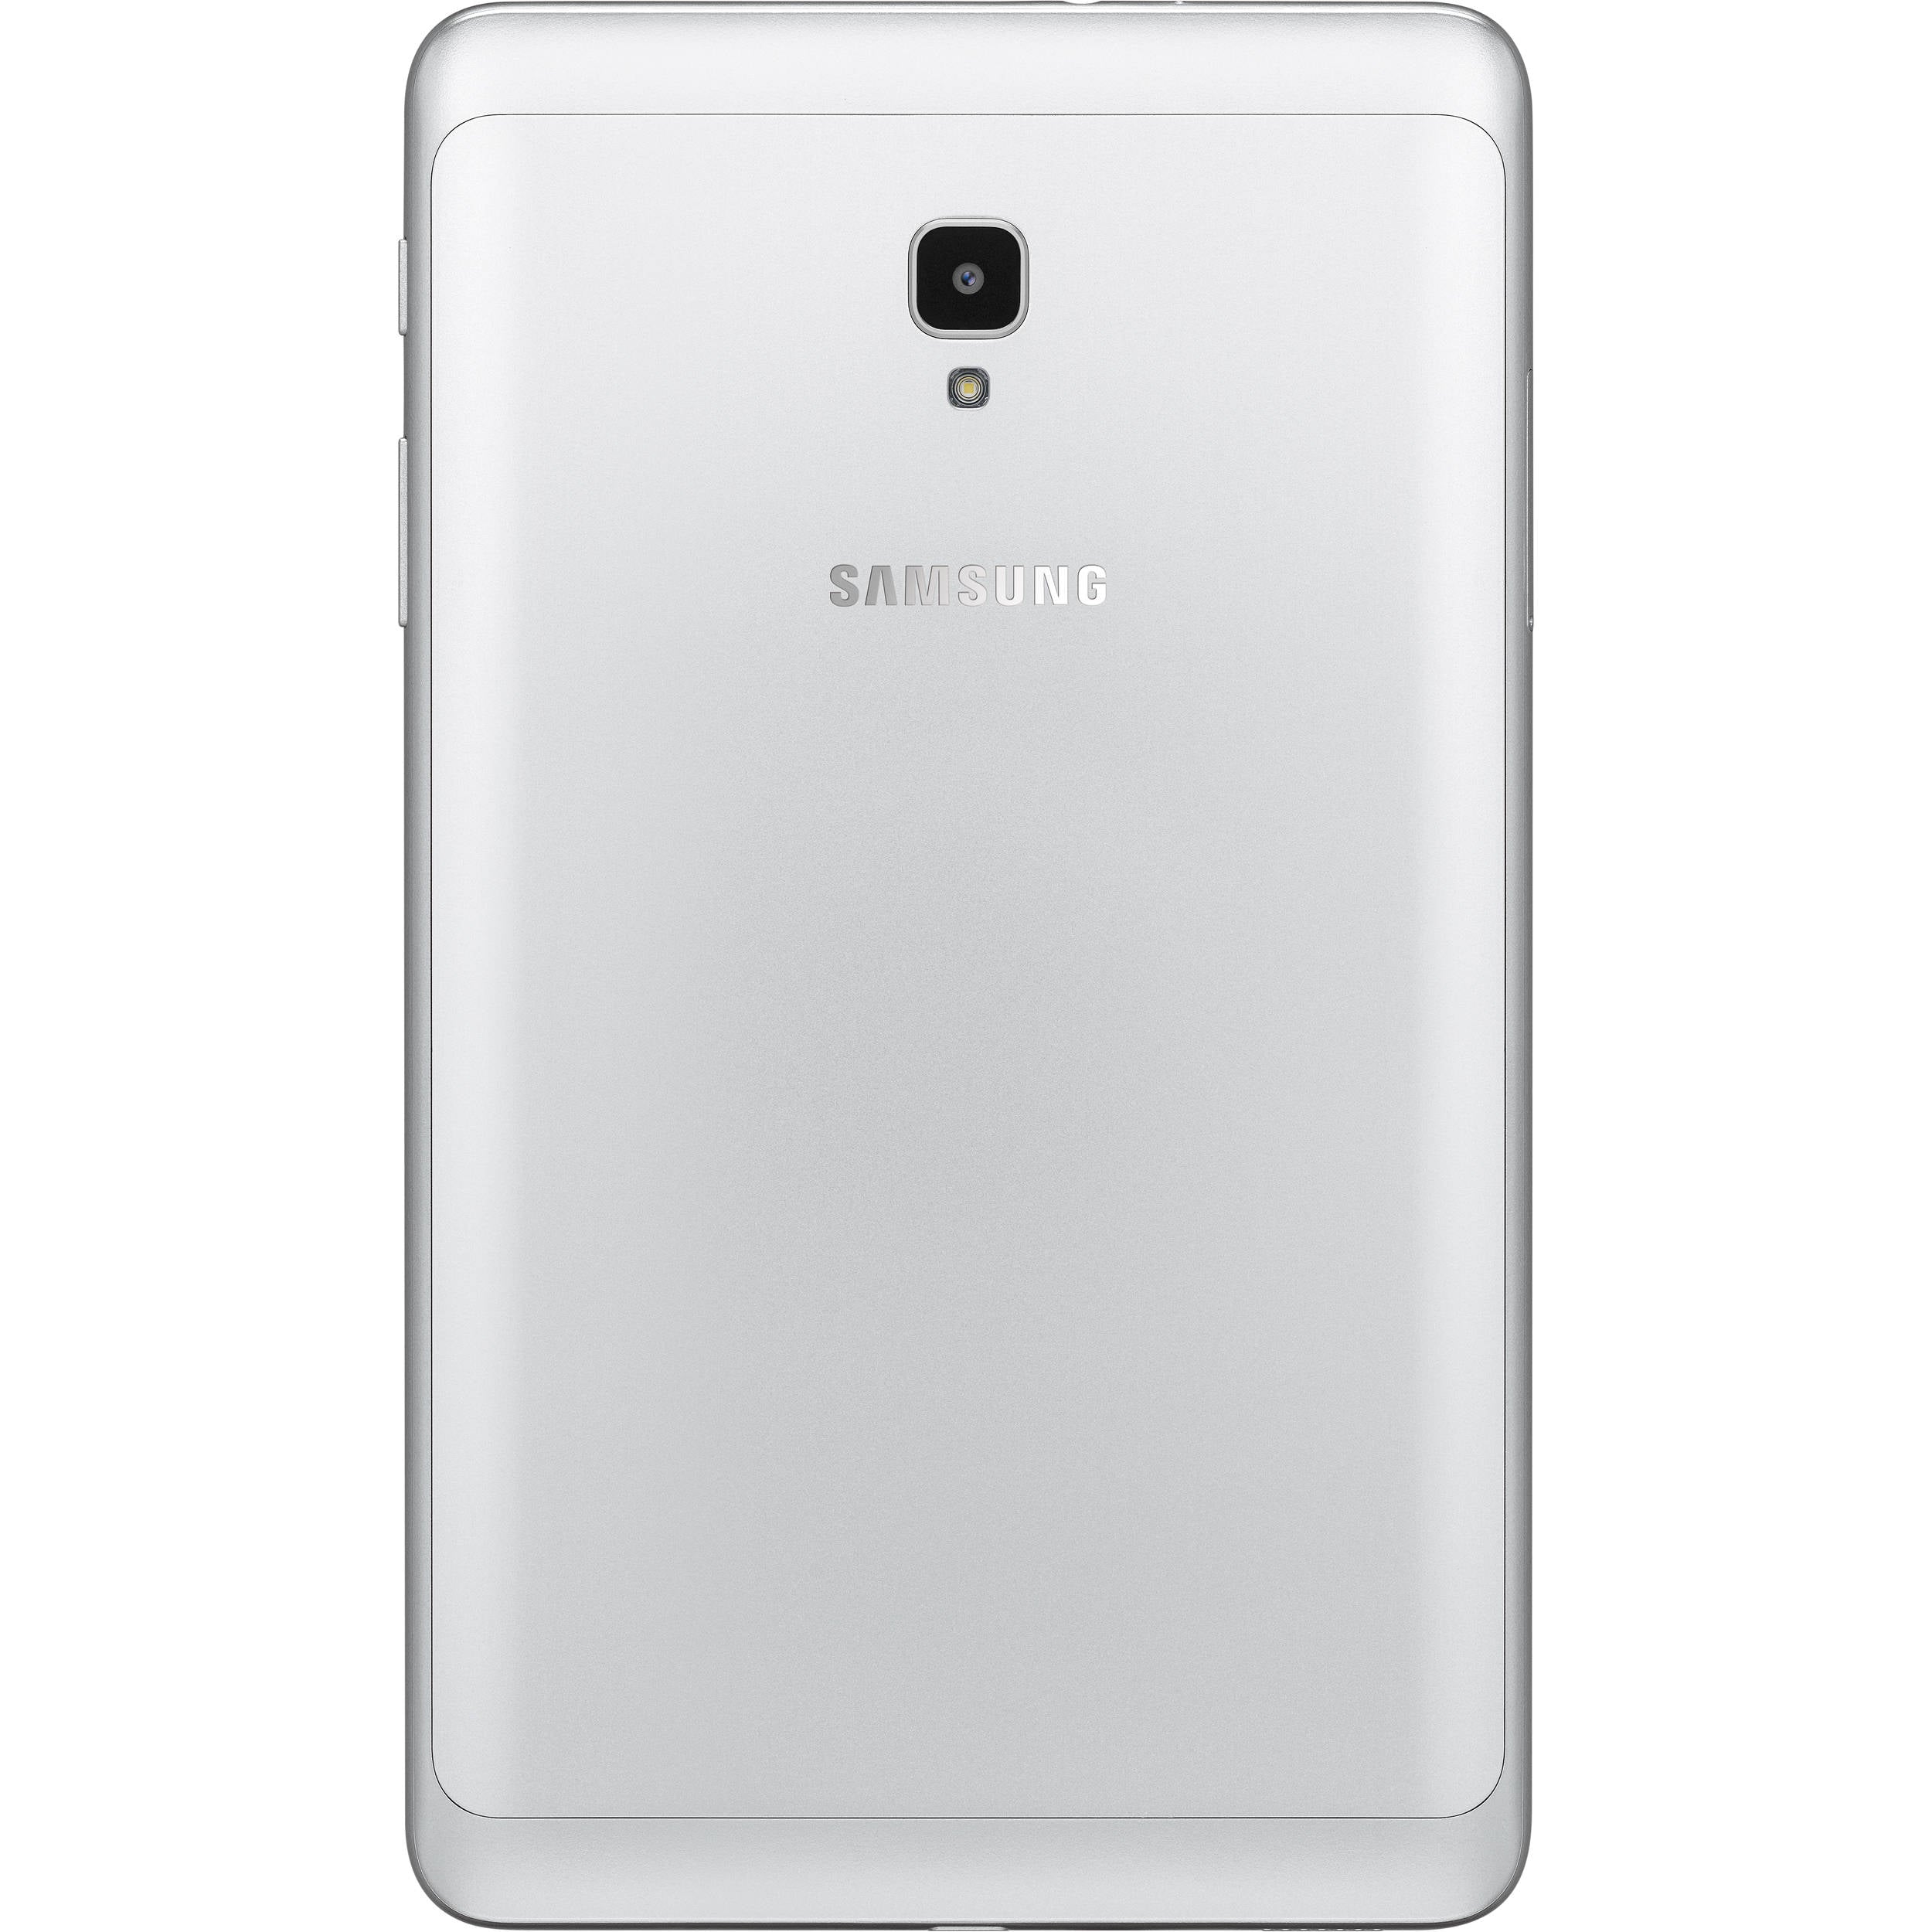 Samsung SM-T380NZSEXAR-RBC 8.0" Galaxy Tab A 32GB Wi-Fi Android Tablet Silver - Certified Refurbished